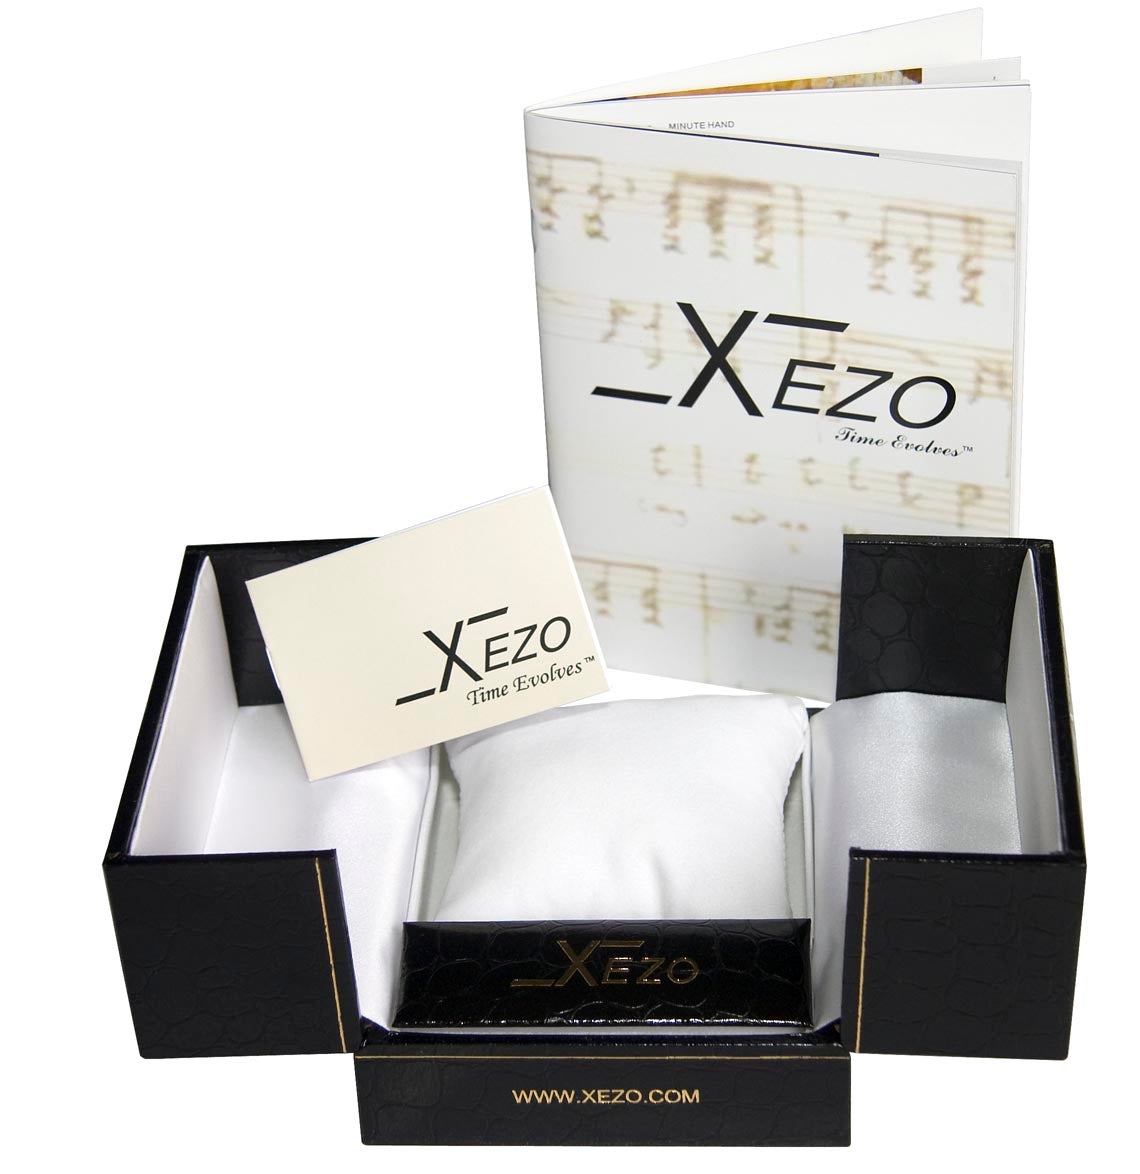 Xezo - Black gift box, certificate, and manual of the Air Commando D44 S (Silver Guilloché dial) watch 